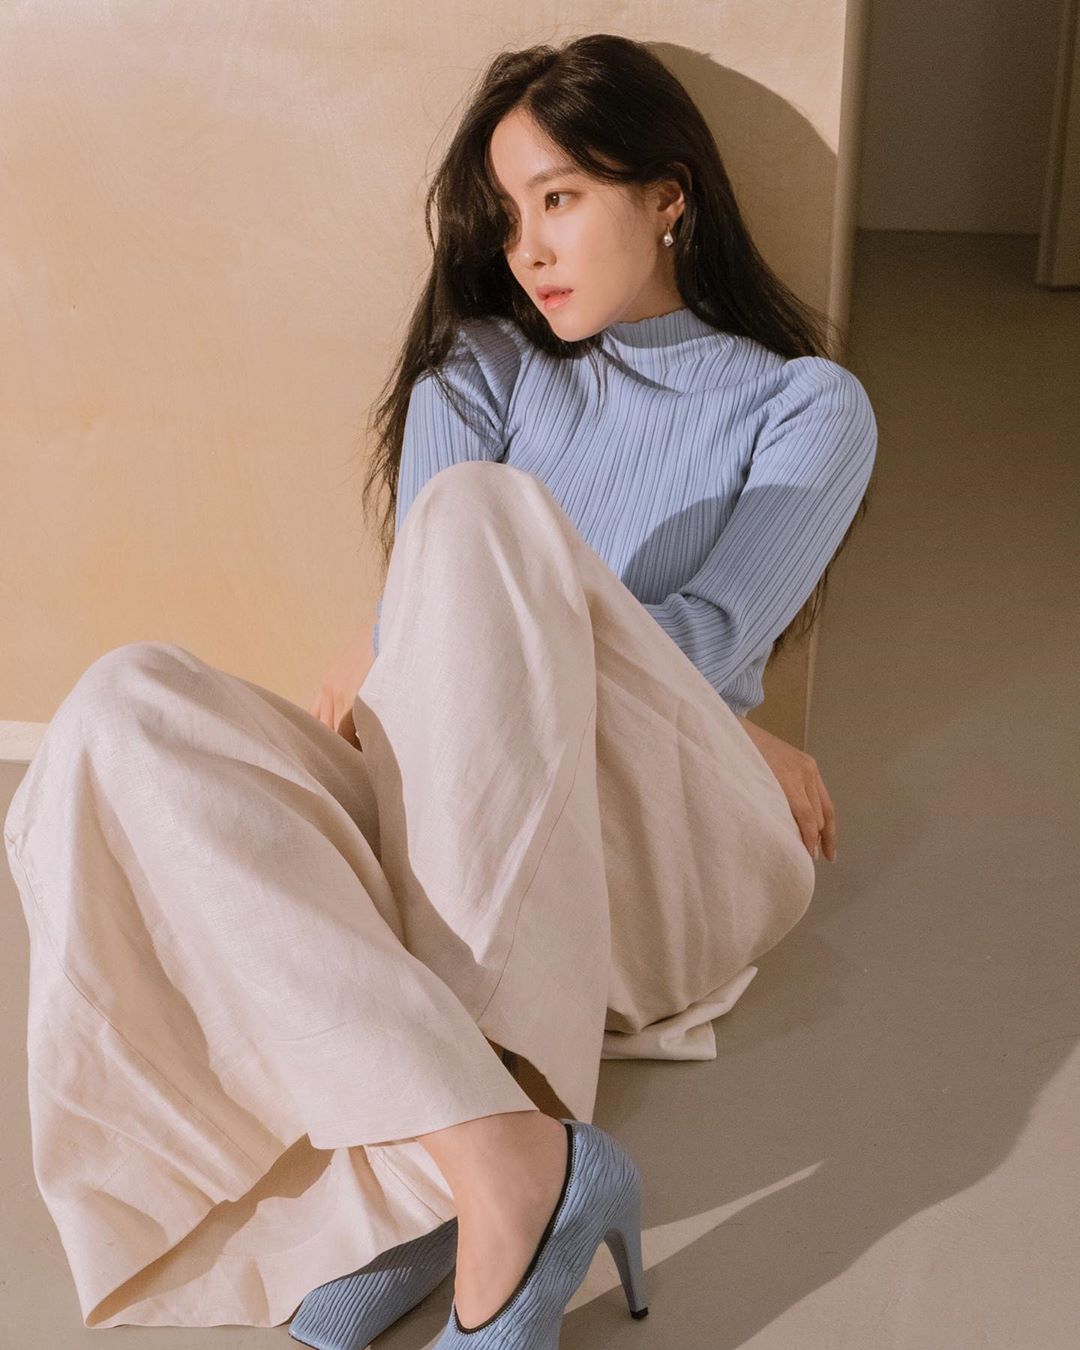 Group T-ara Hyomin has revealed its current status.Hyomin posted several photos on his Instagram account on the 20th without any comment.In the open photo, Hyomin stares at the camera with chic eyes. Hyomin boasts a fashion sense by matching beige wide pants with a light blue T-shirt.In particular, Hyomin caught his eye with a Doll-like visual; netizens responded total atmosphere and too pretty.Meanwhile, Hyomin is appearing on the Lifetime Channel entertainment program Beauty Time.Photo: Hyomin Instagram